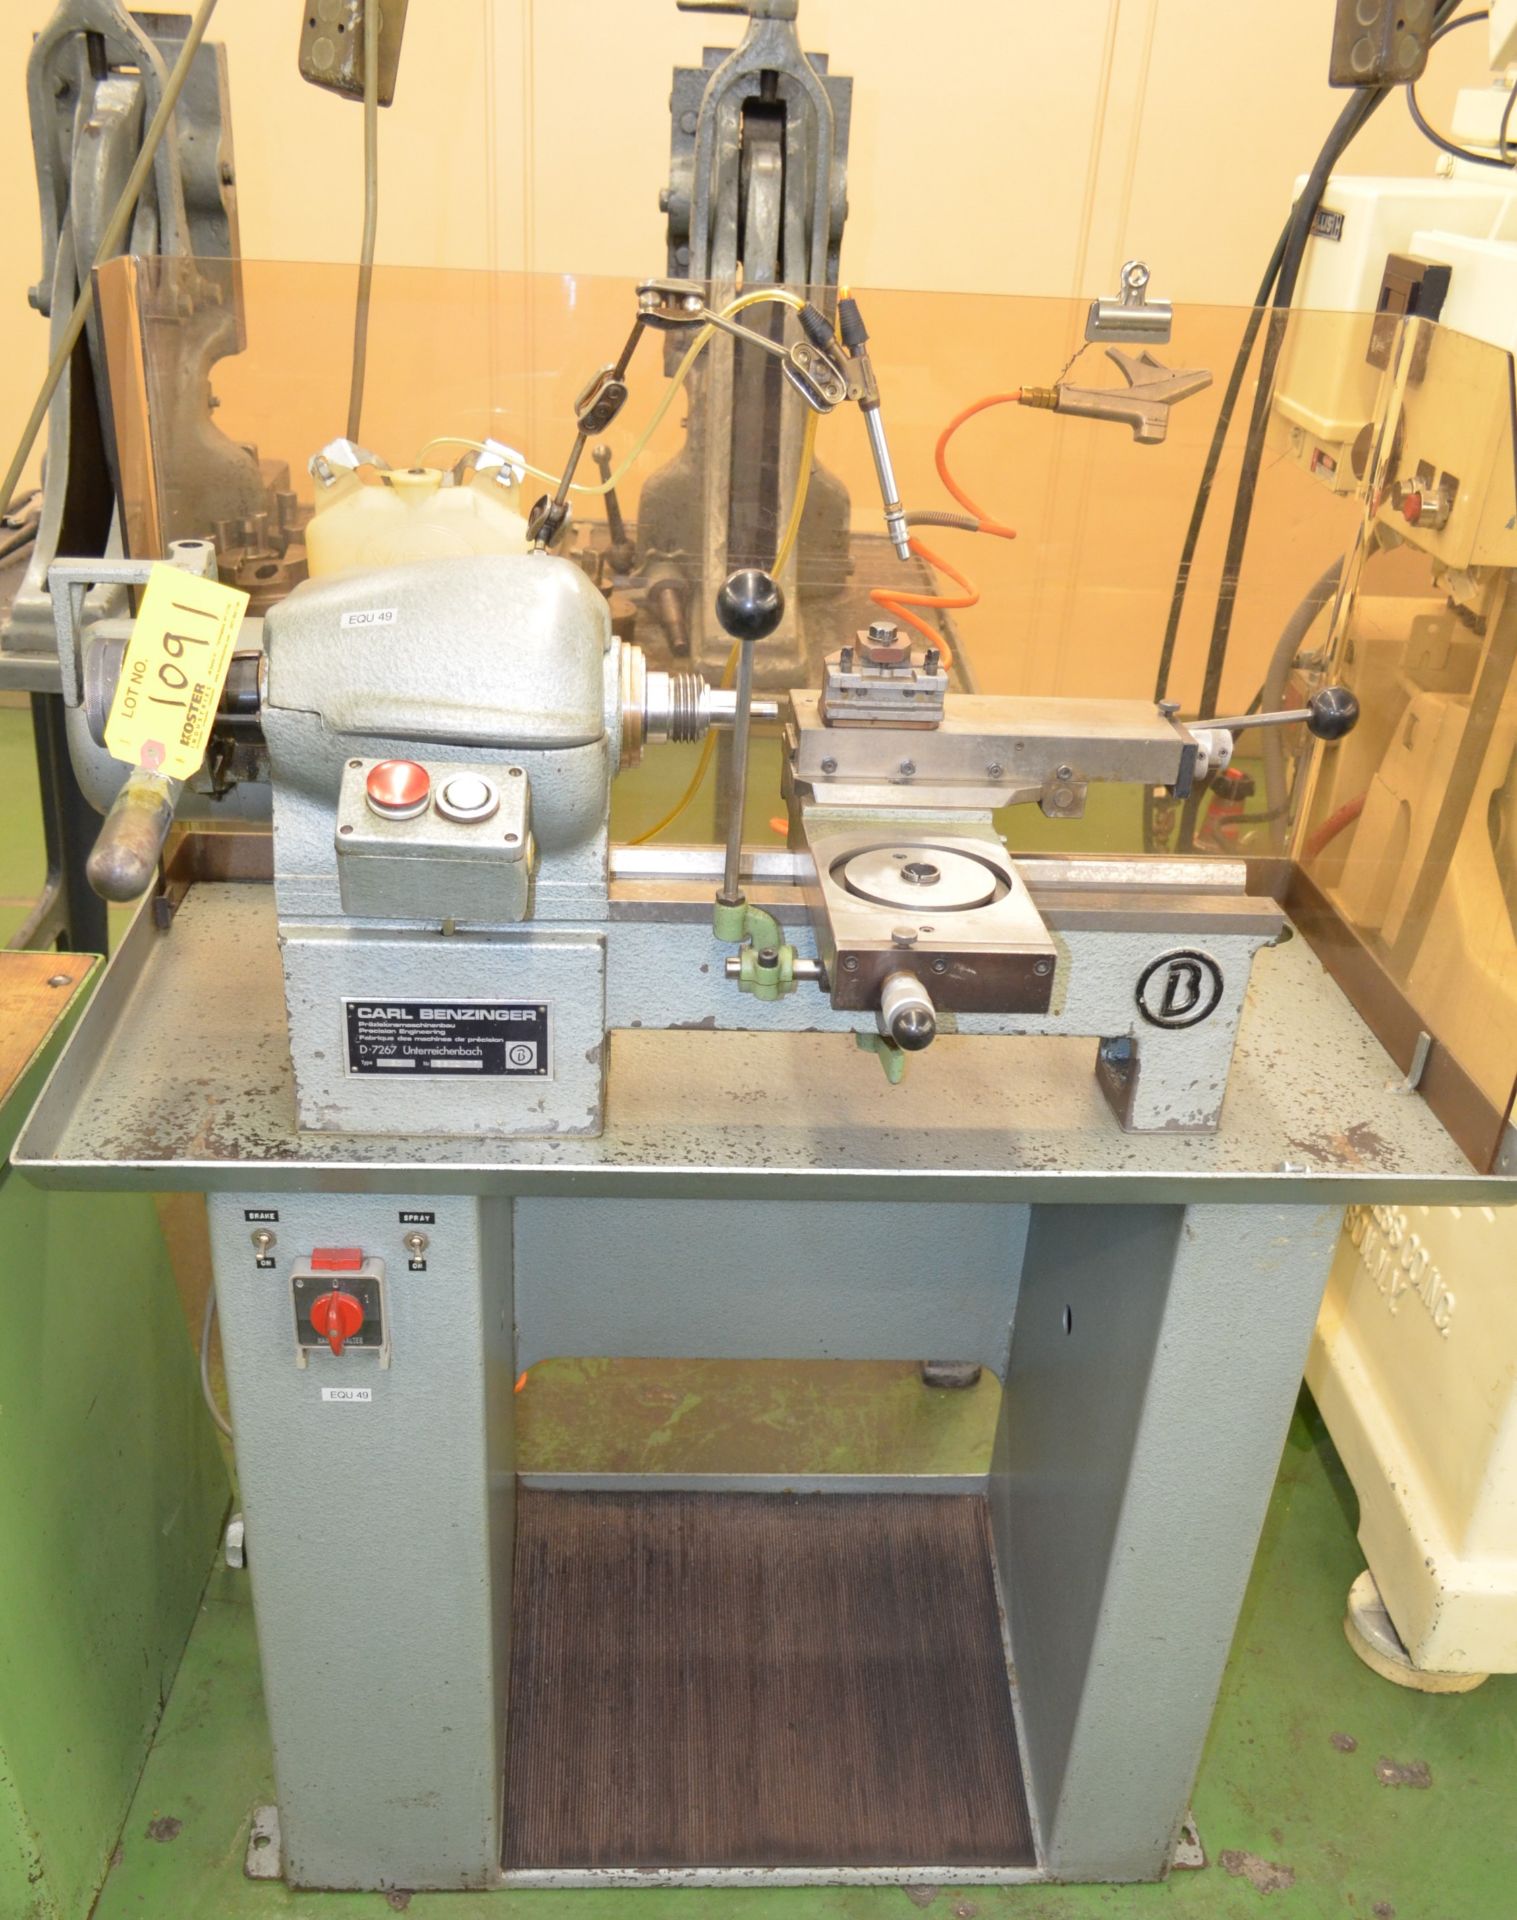 BENZINGER JEWELERS LATHE, WITH COMPOUND & COLLET CLOSER